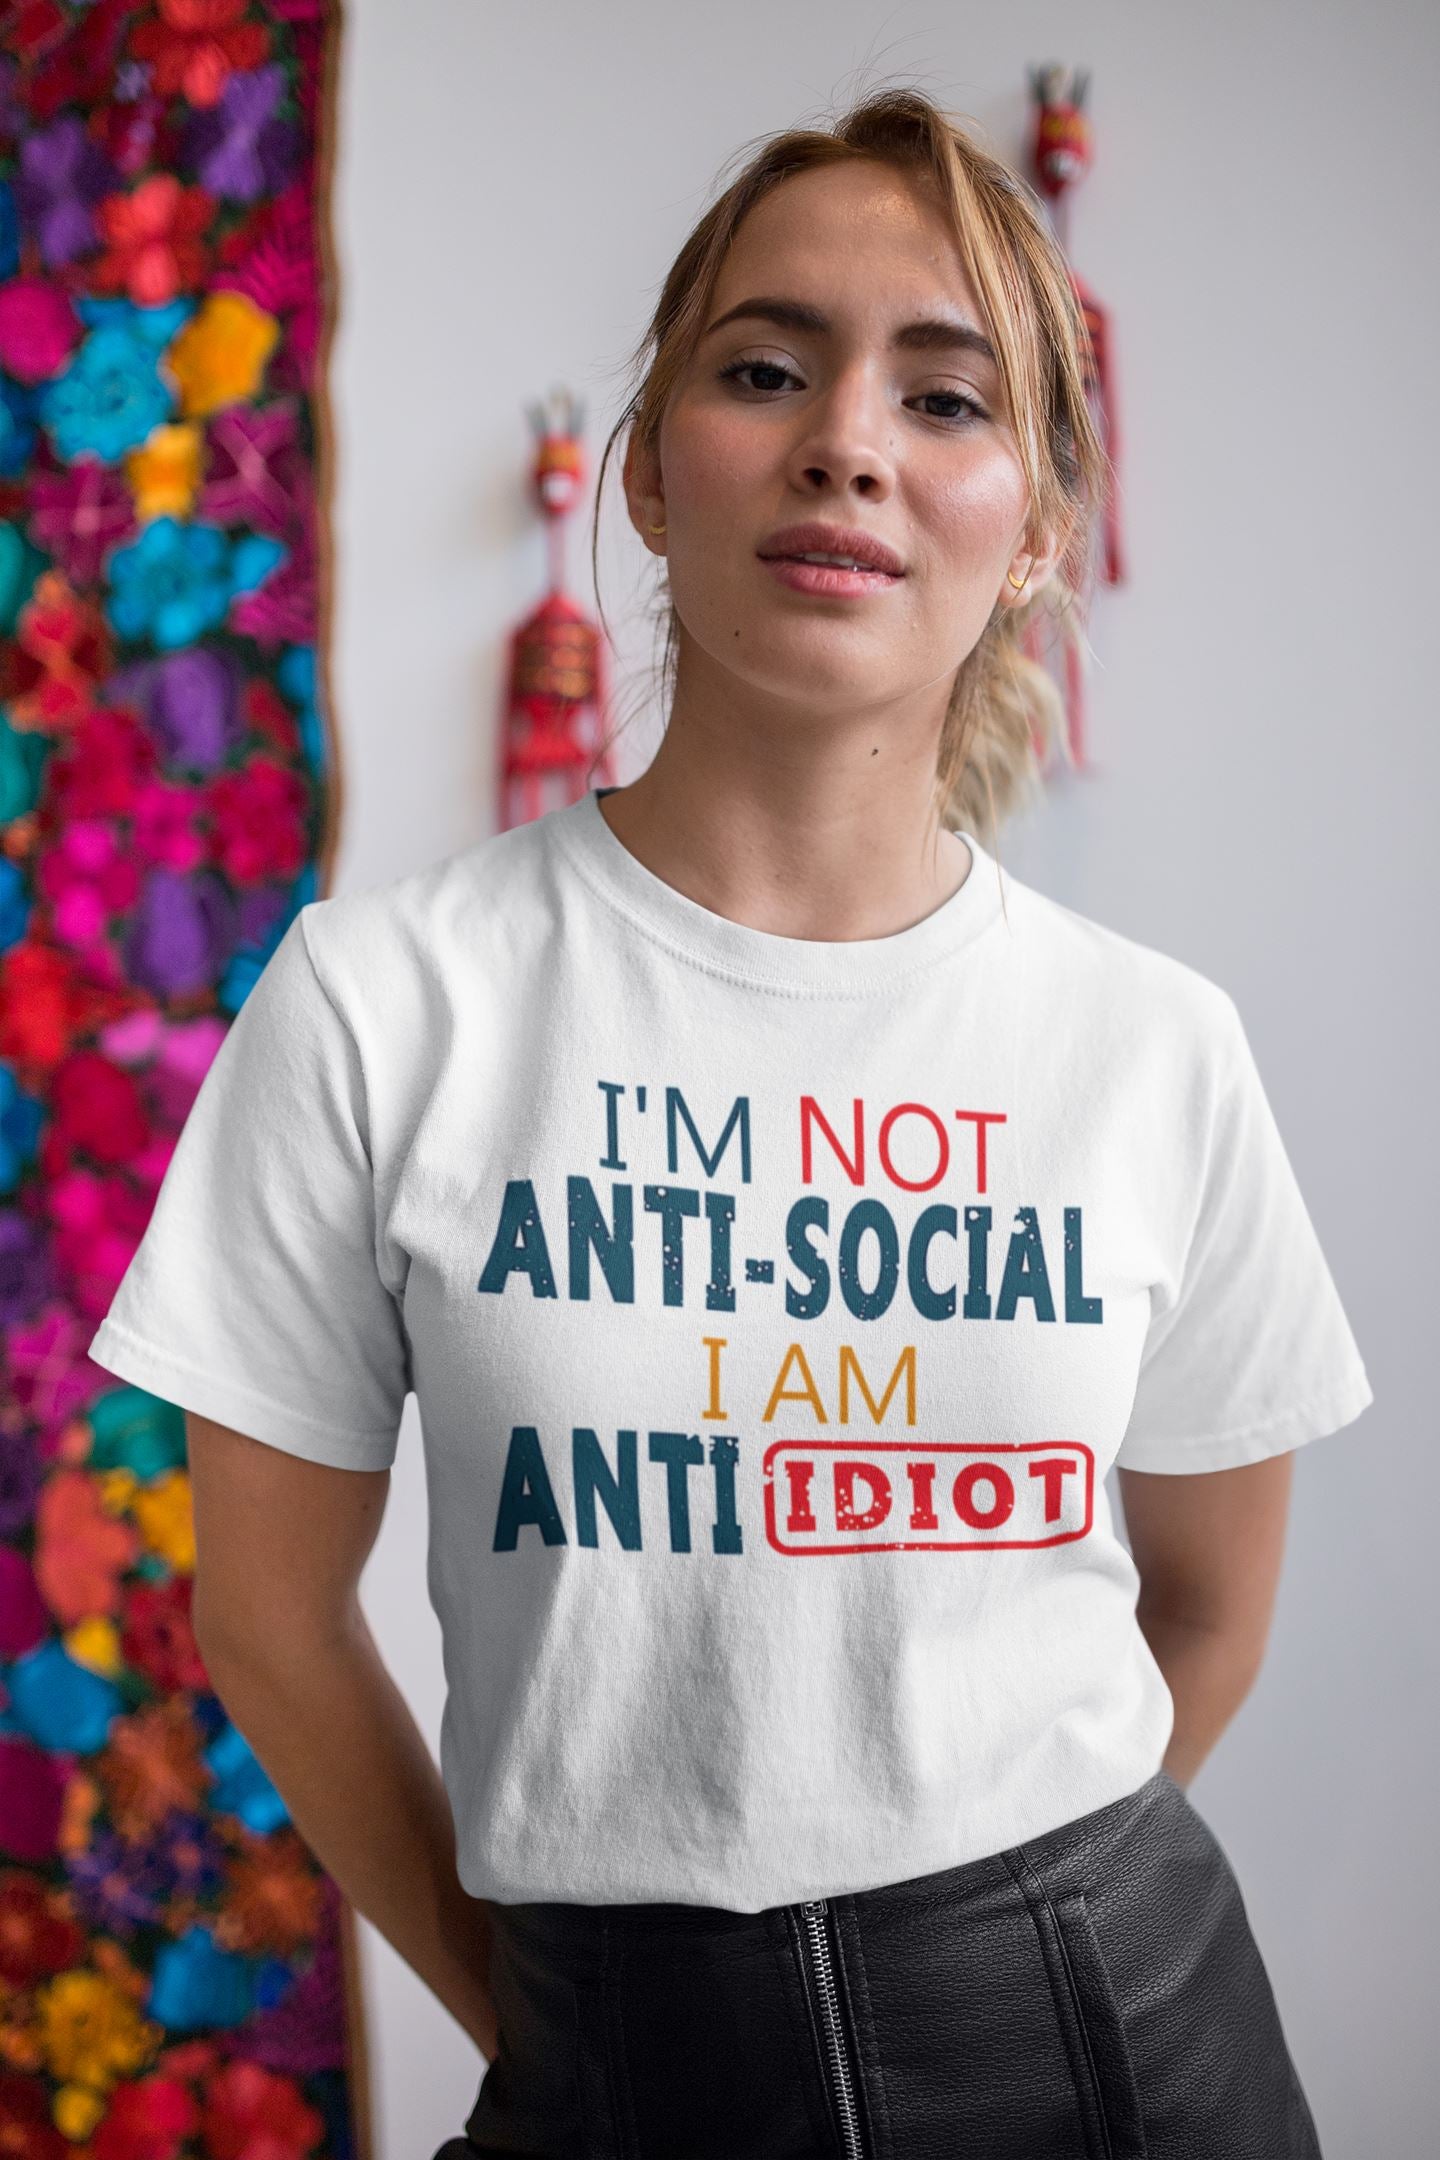 I am not Anti Social I am Anti Idiot Funny White Tshirt for Men and Women freeshipping - Catch My Drift India